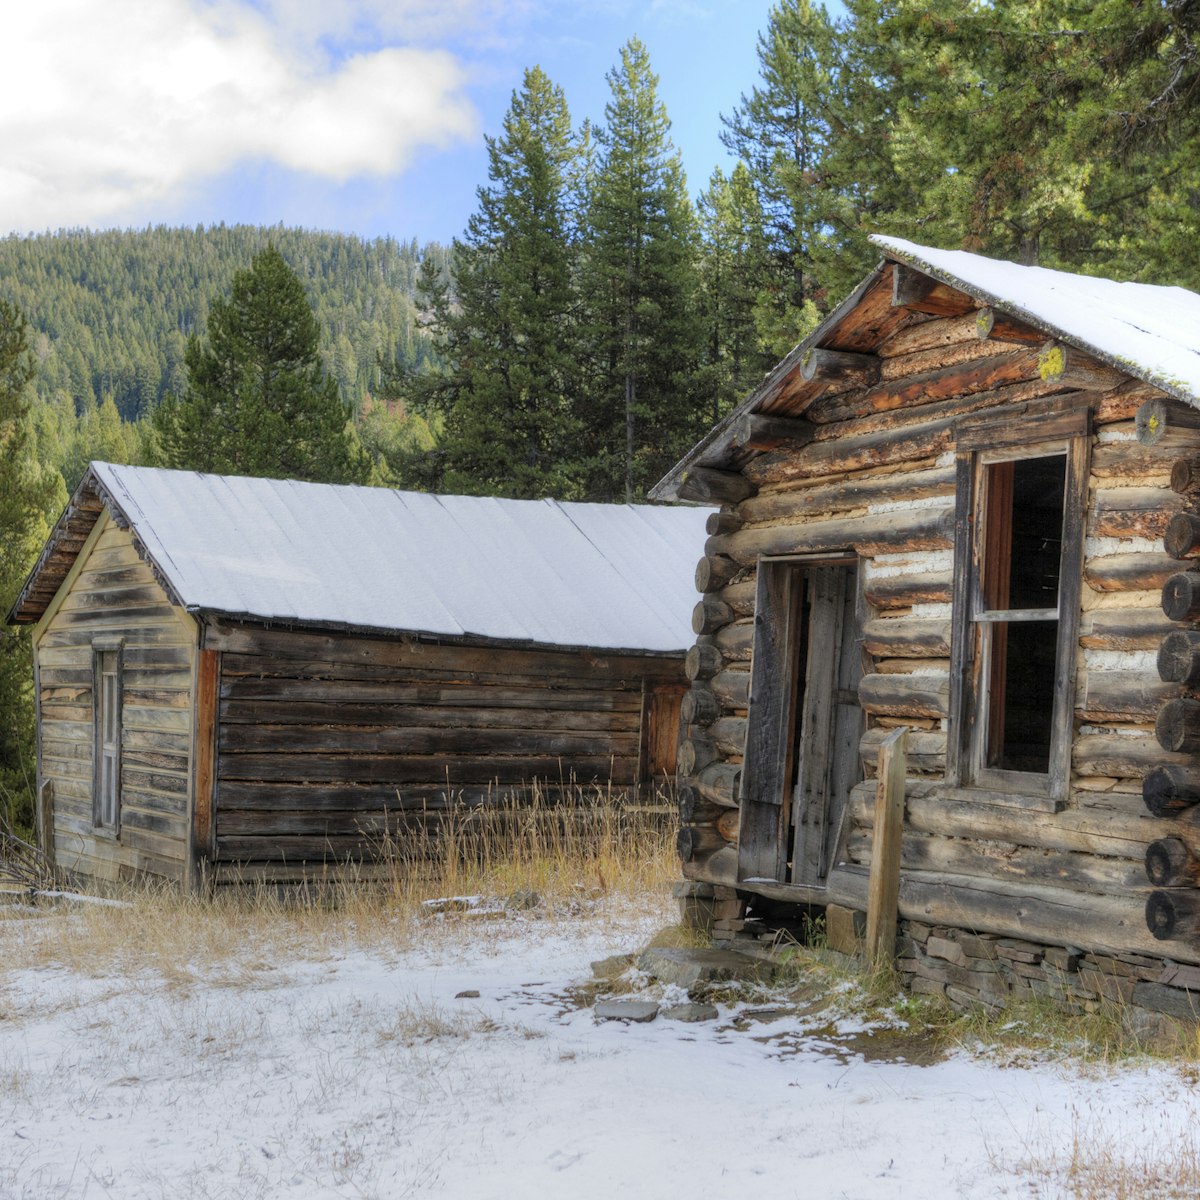 Miners' cabins in a ghost town at 6000 ft elevation in the Montana wilderness. Photographed five years before the town was added to the National Register of Historic Places.
1296758705